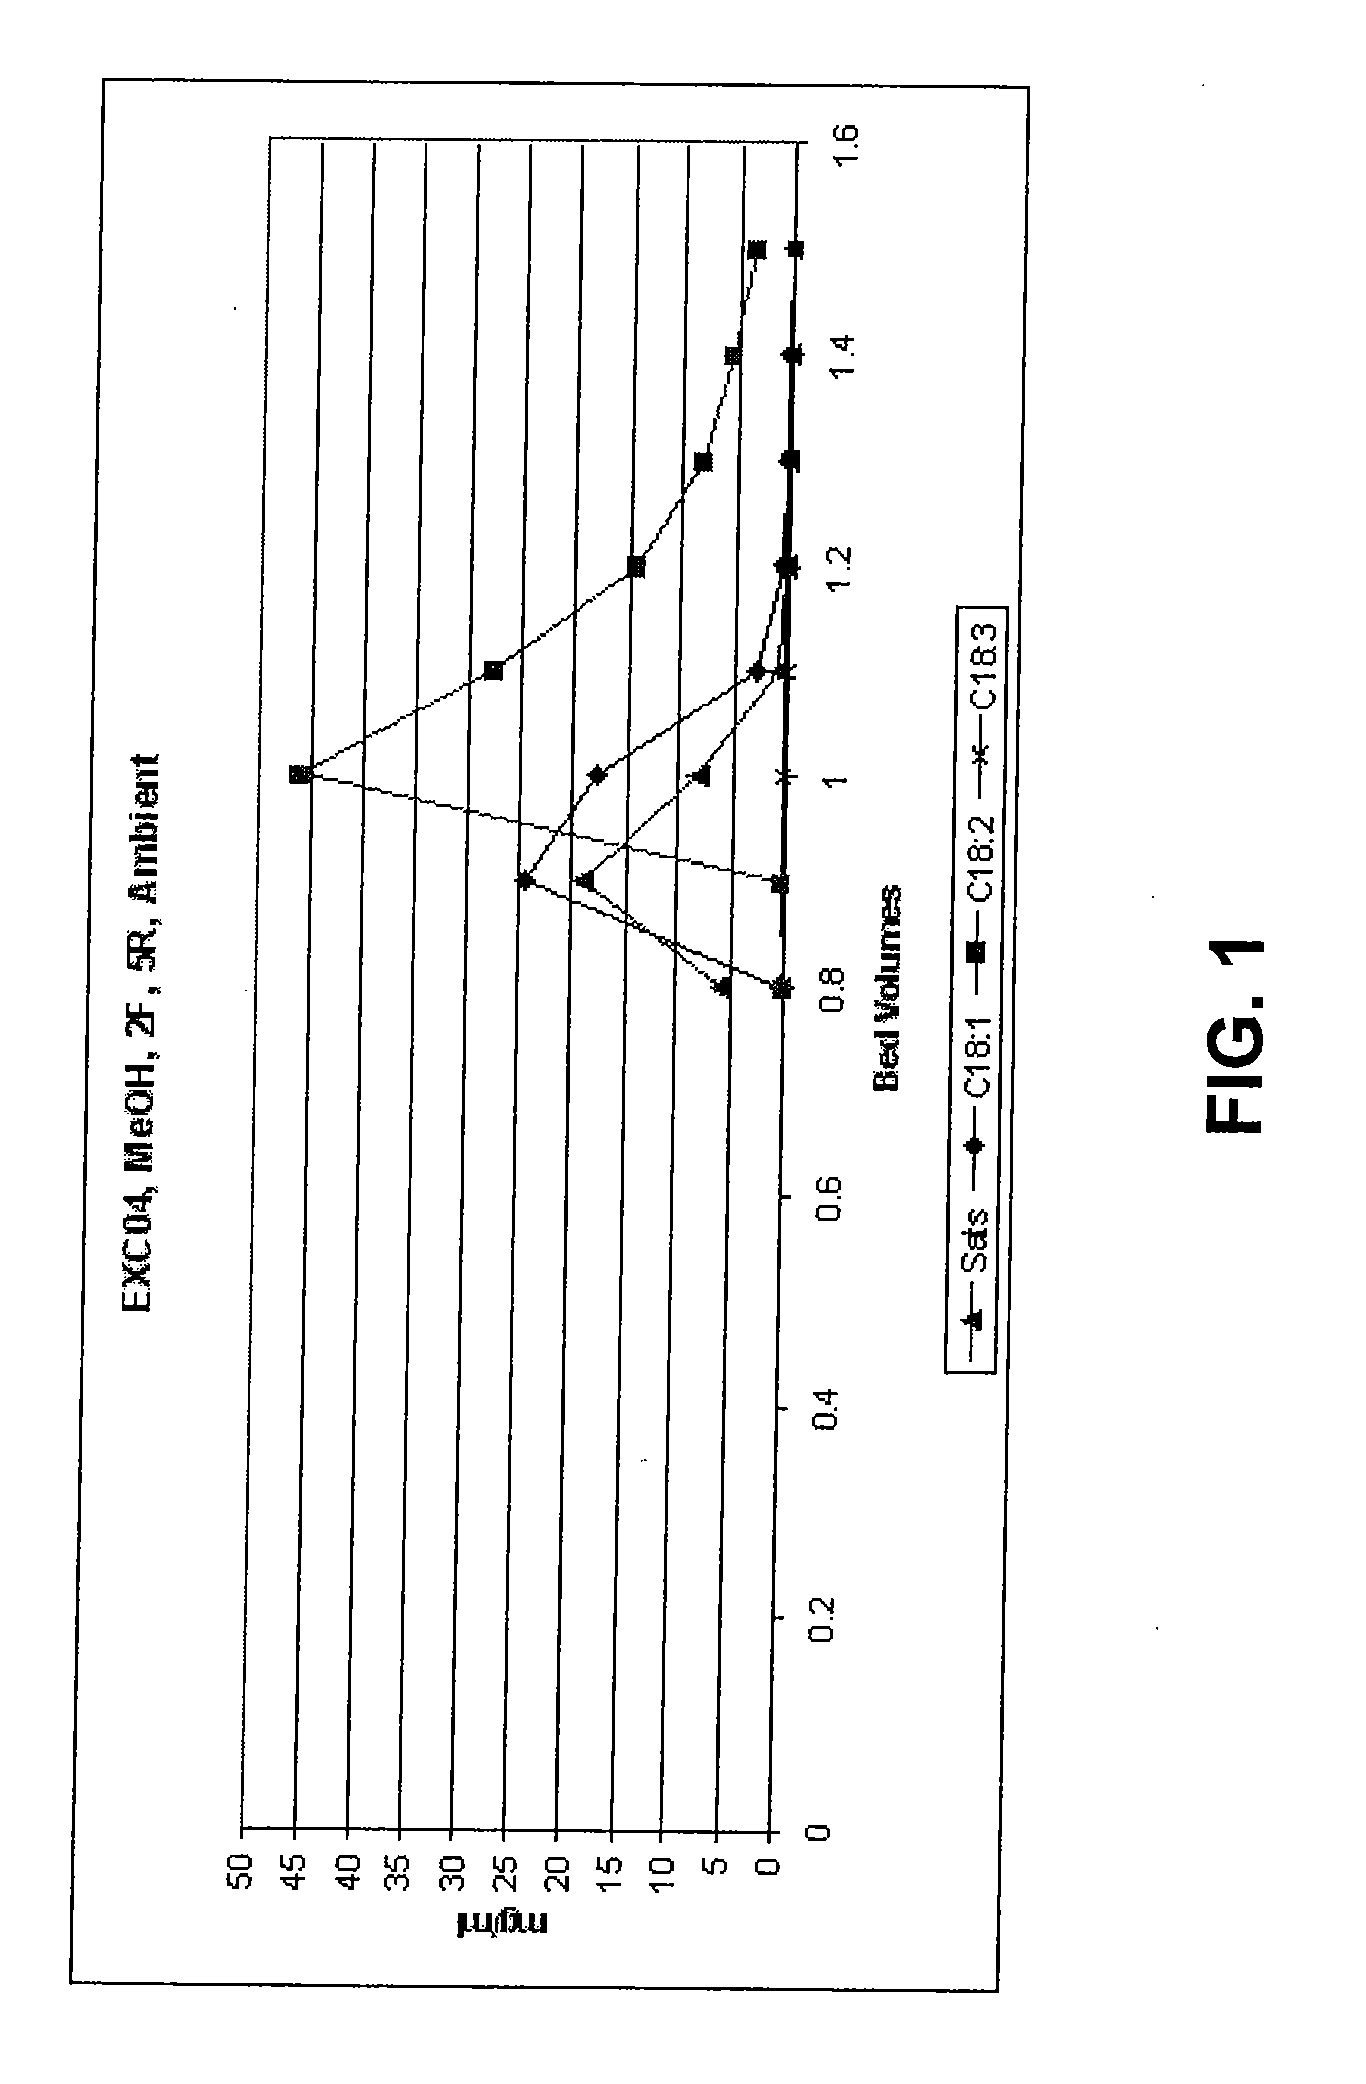 Method of Preparing a Composition Using Argentation Chromatography